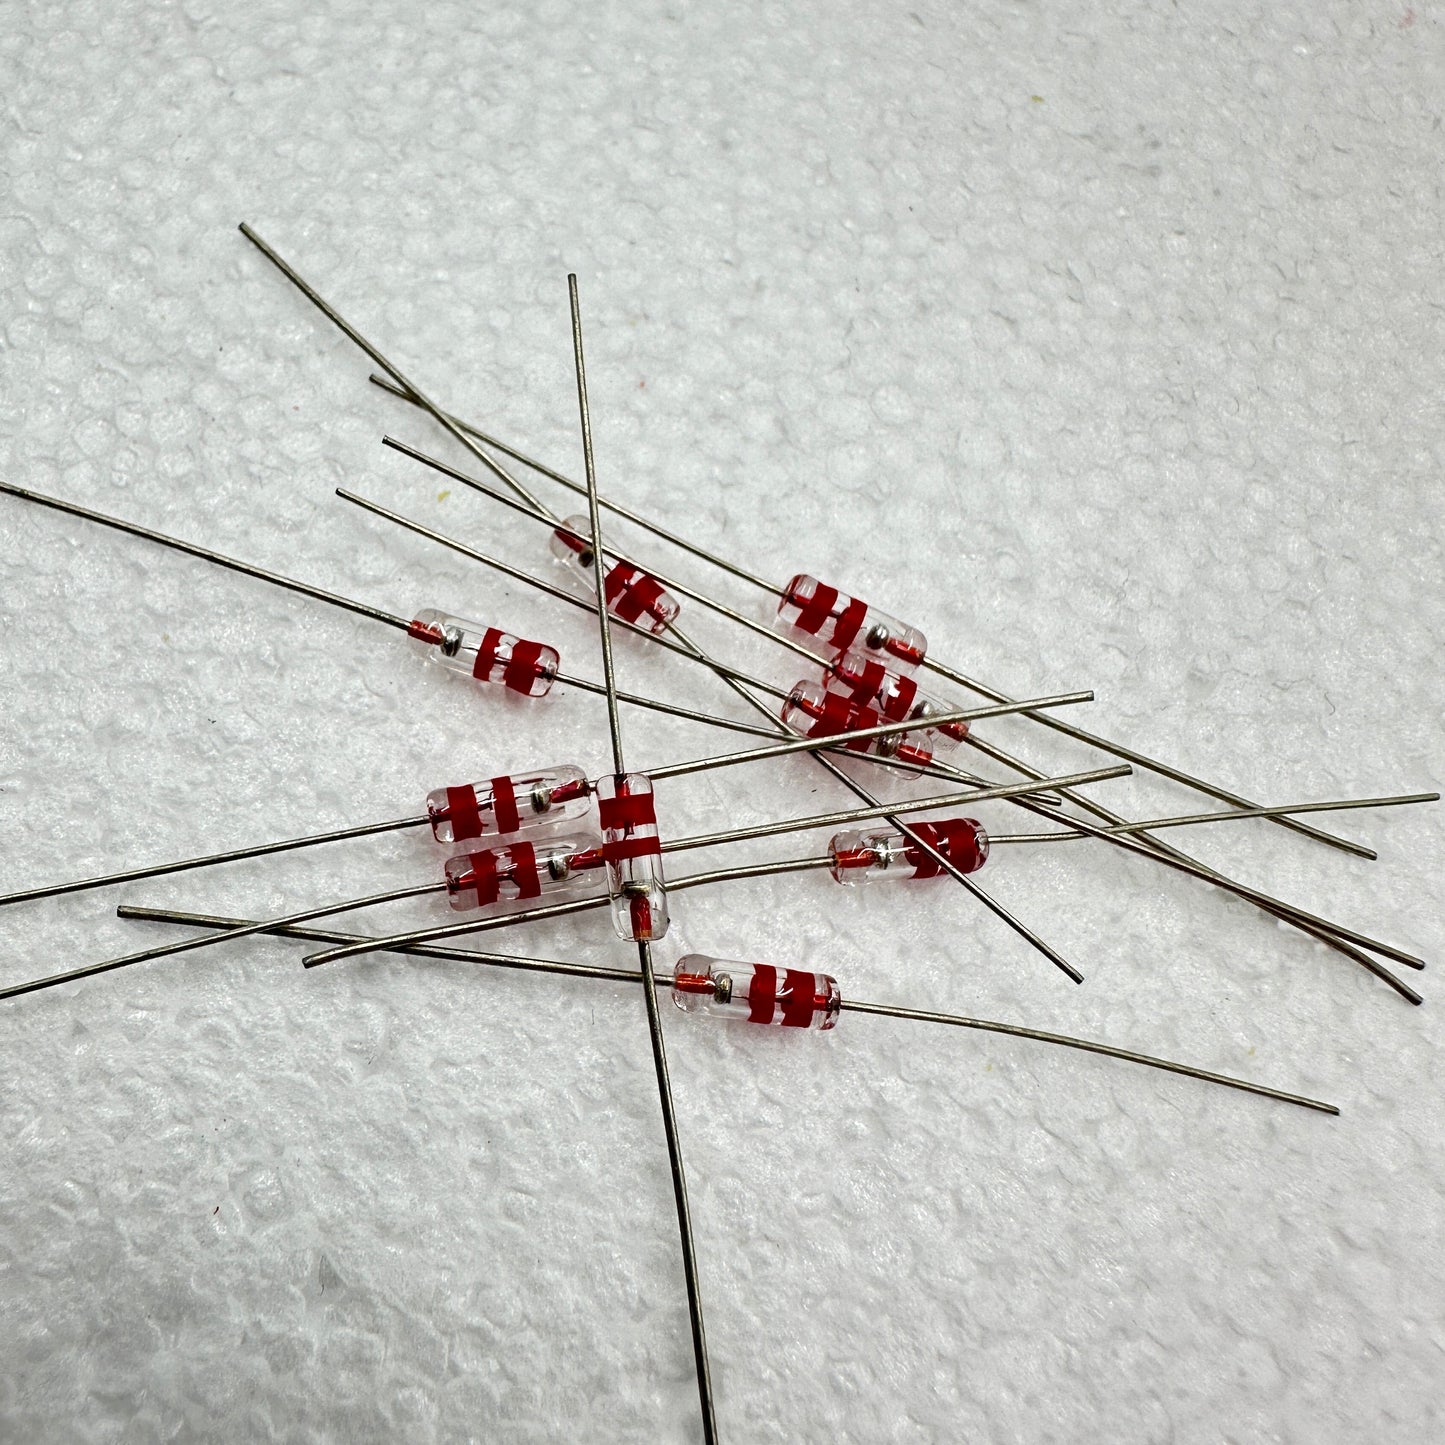 10 PACK D9B Germanium Diodes Russian Military NOS